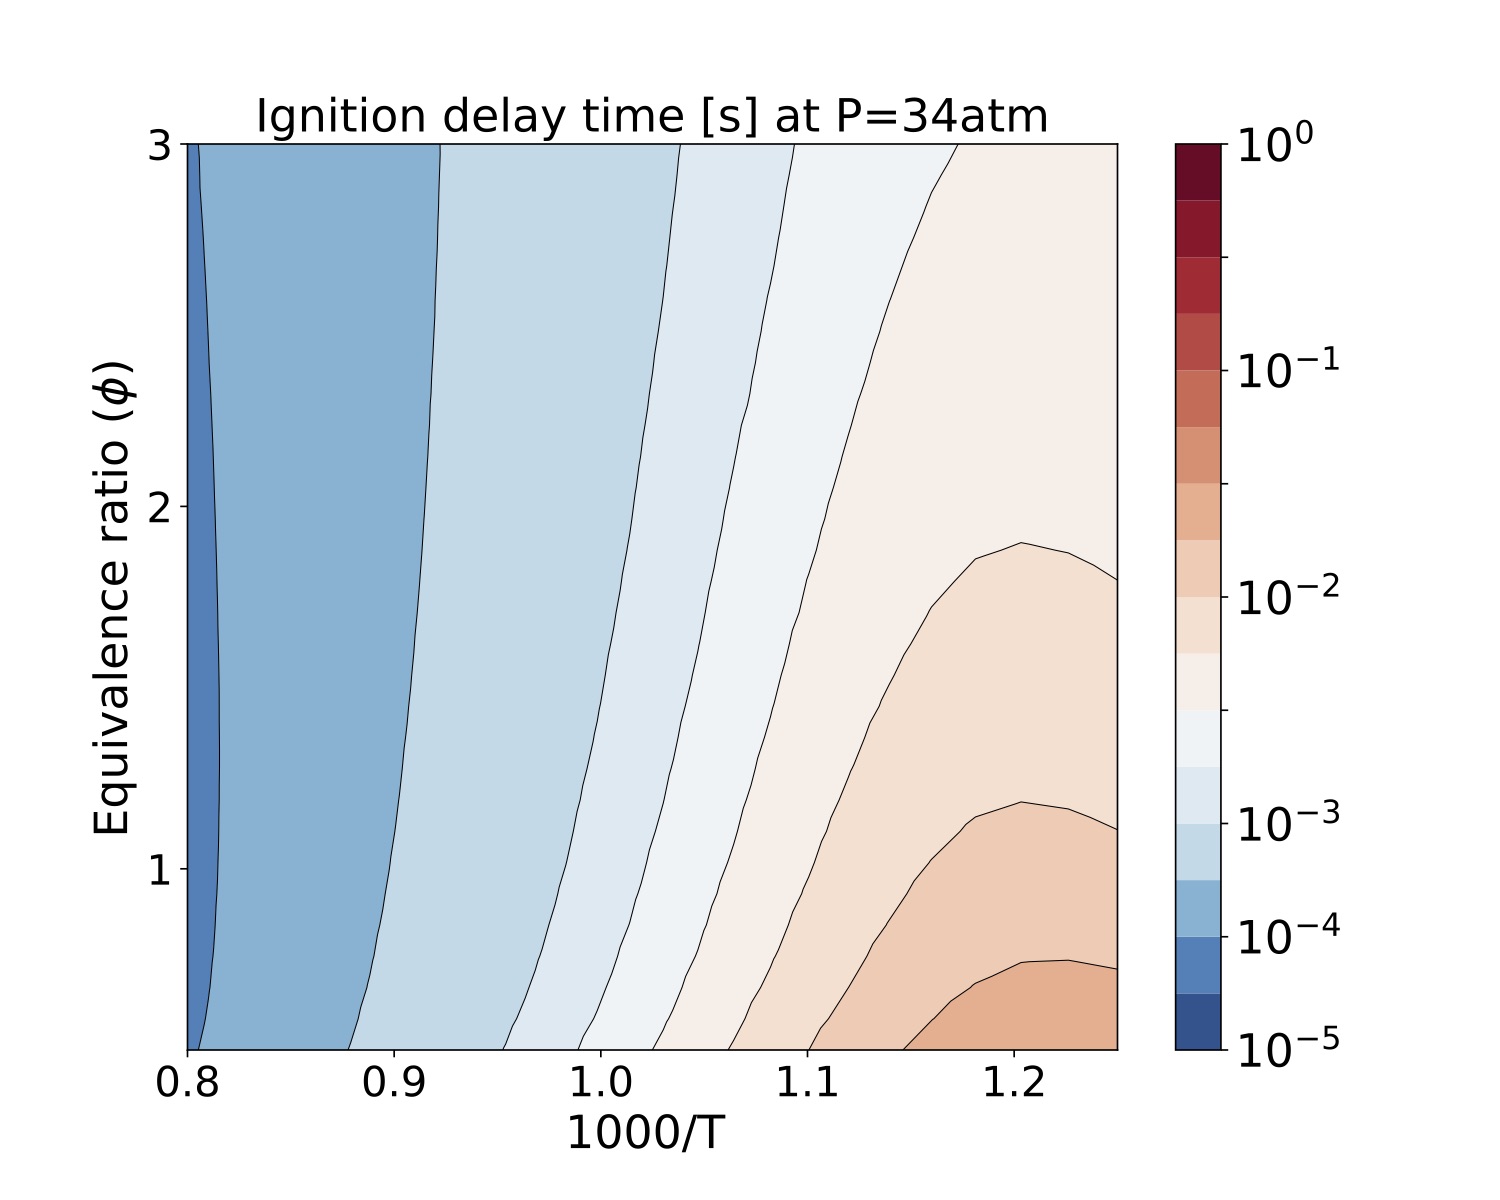 Ignition delay time (s) of isooctane at 34 atm